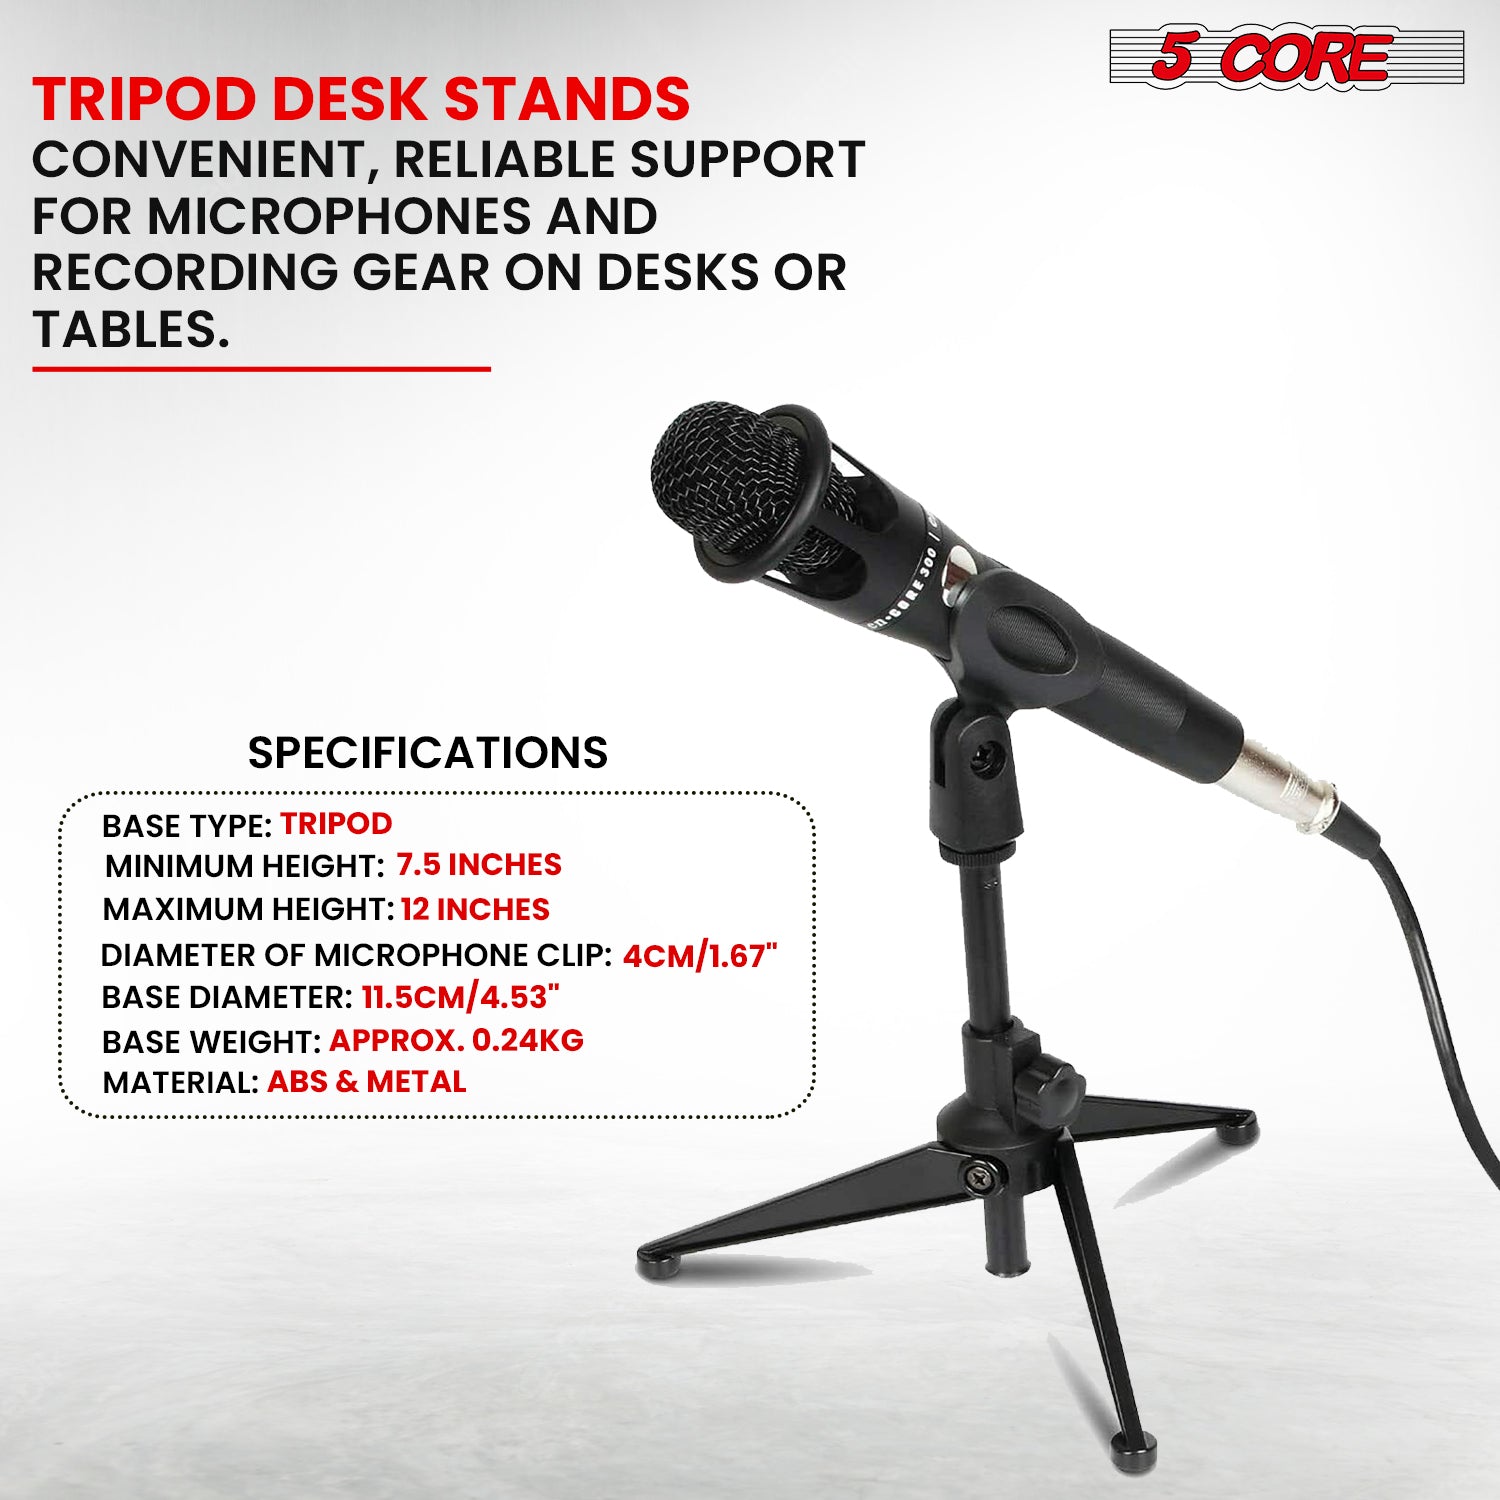 Compact mic stand for desks: Easy to set up and adjust.